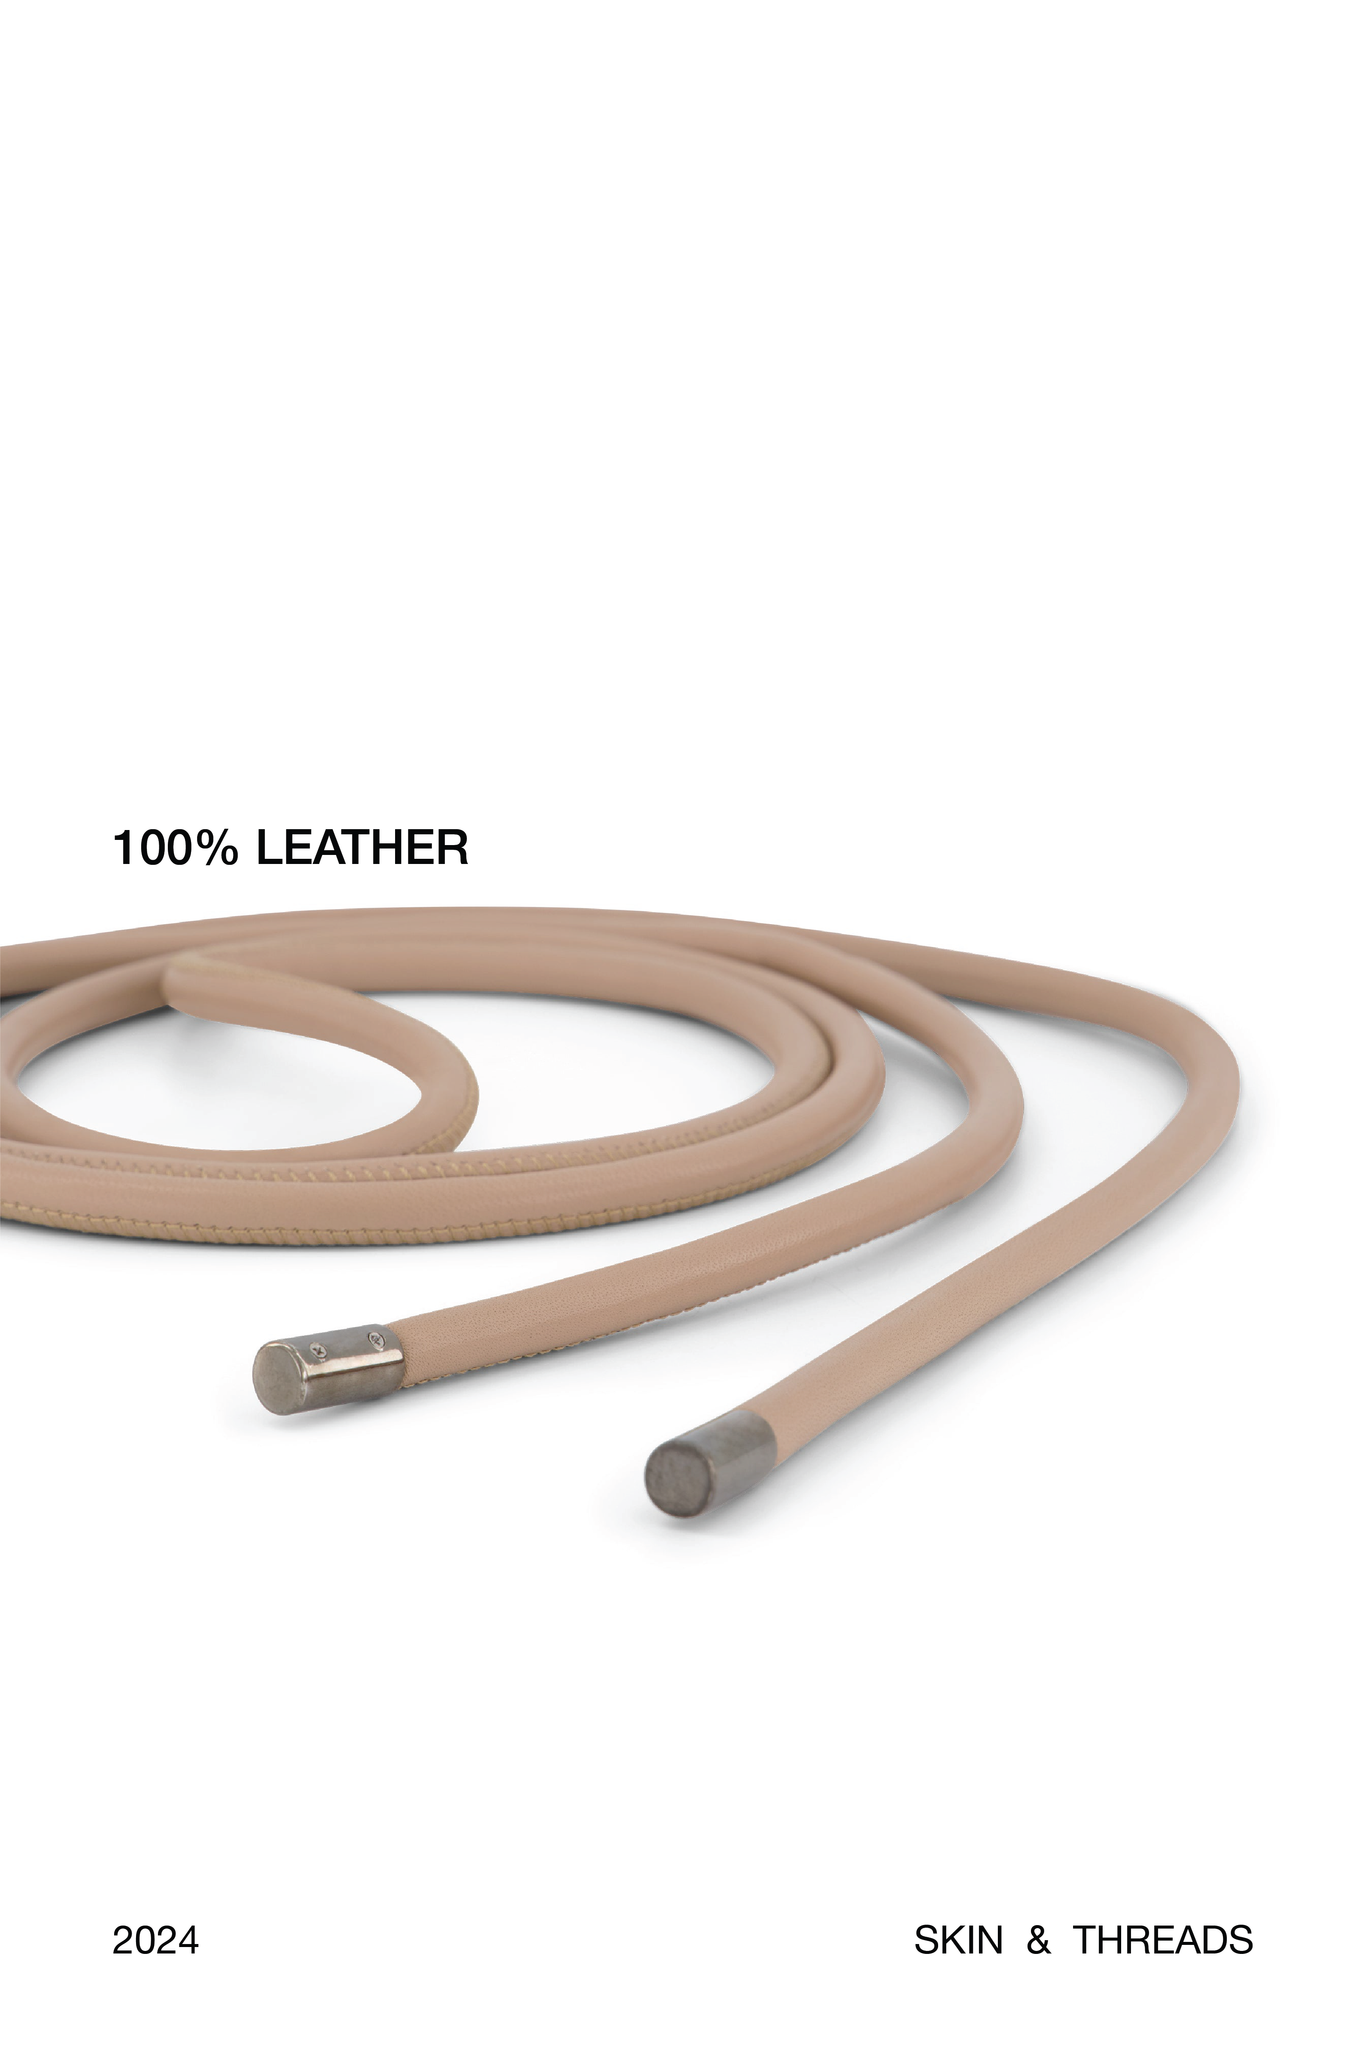 Leather Rouleau Belt - NEW CAMEL